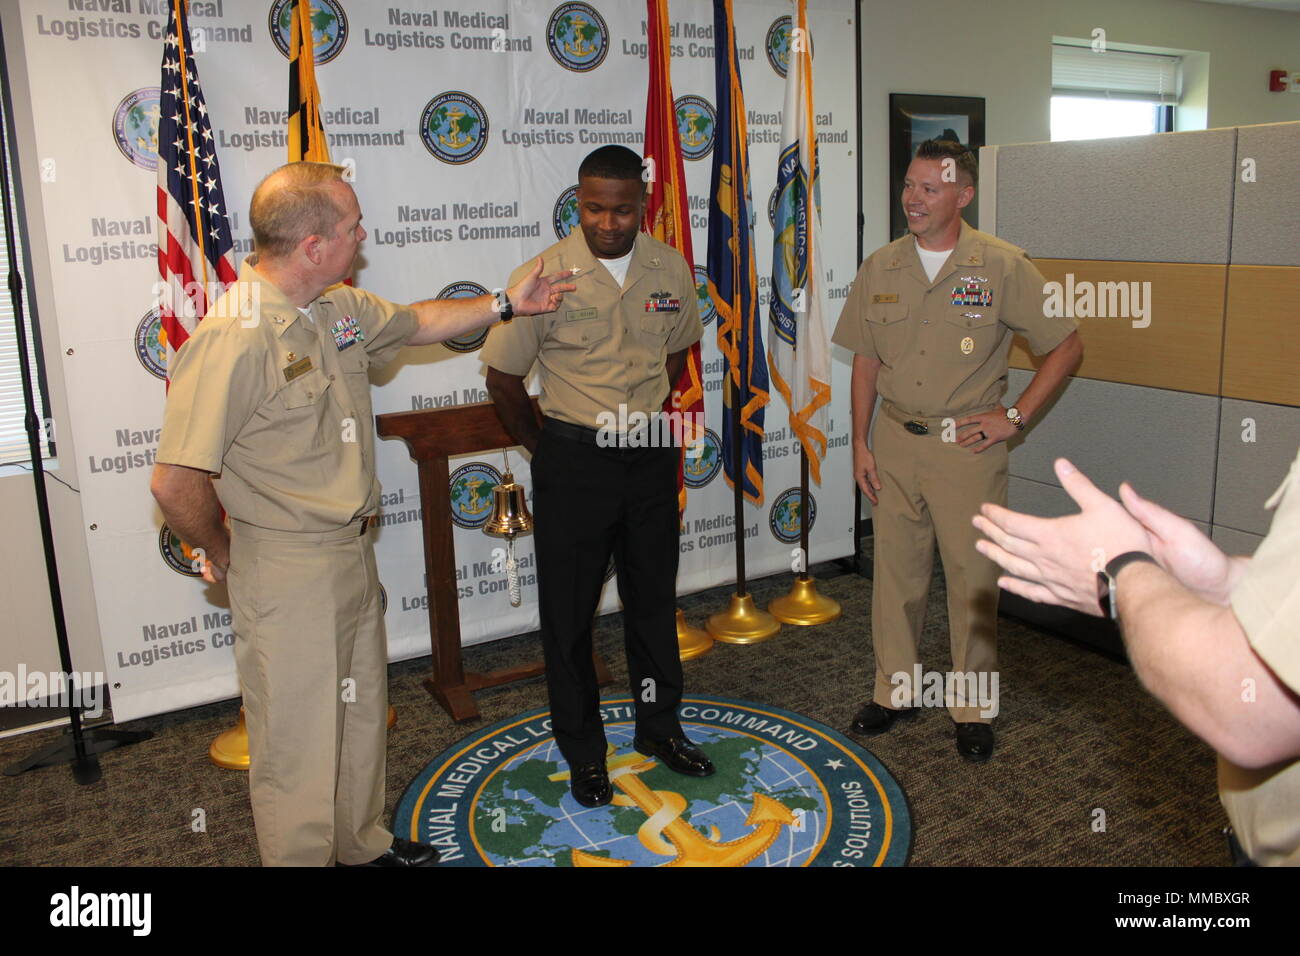 Capt. Tim Richardson, Naval Medical Logistics Command’s commanding officer, notices that LS2 Jossani Josiah is out of uniform during an unscheduled ceremony. Moments later, Josiah was meritoriously promoted to Petty Officer 1st Class. Command Master Chief Patrick West participates in the announcement. Stock Photo